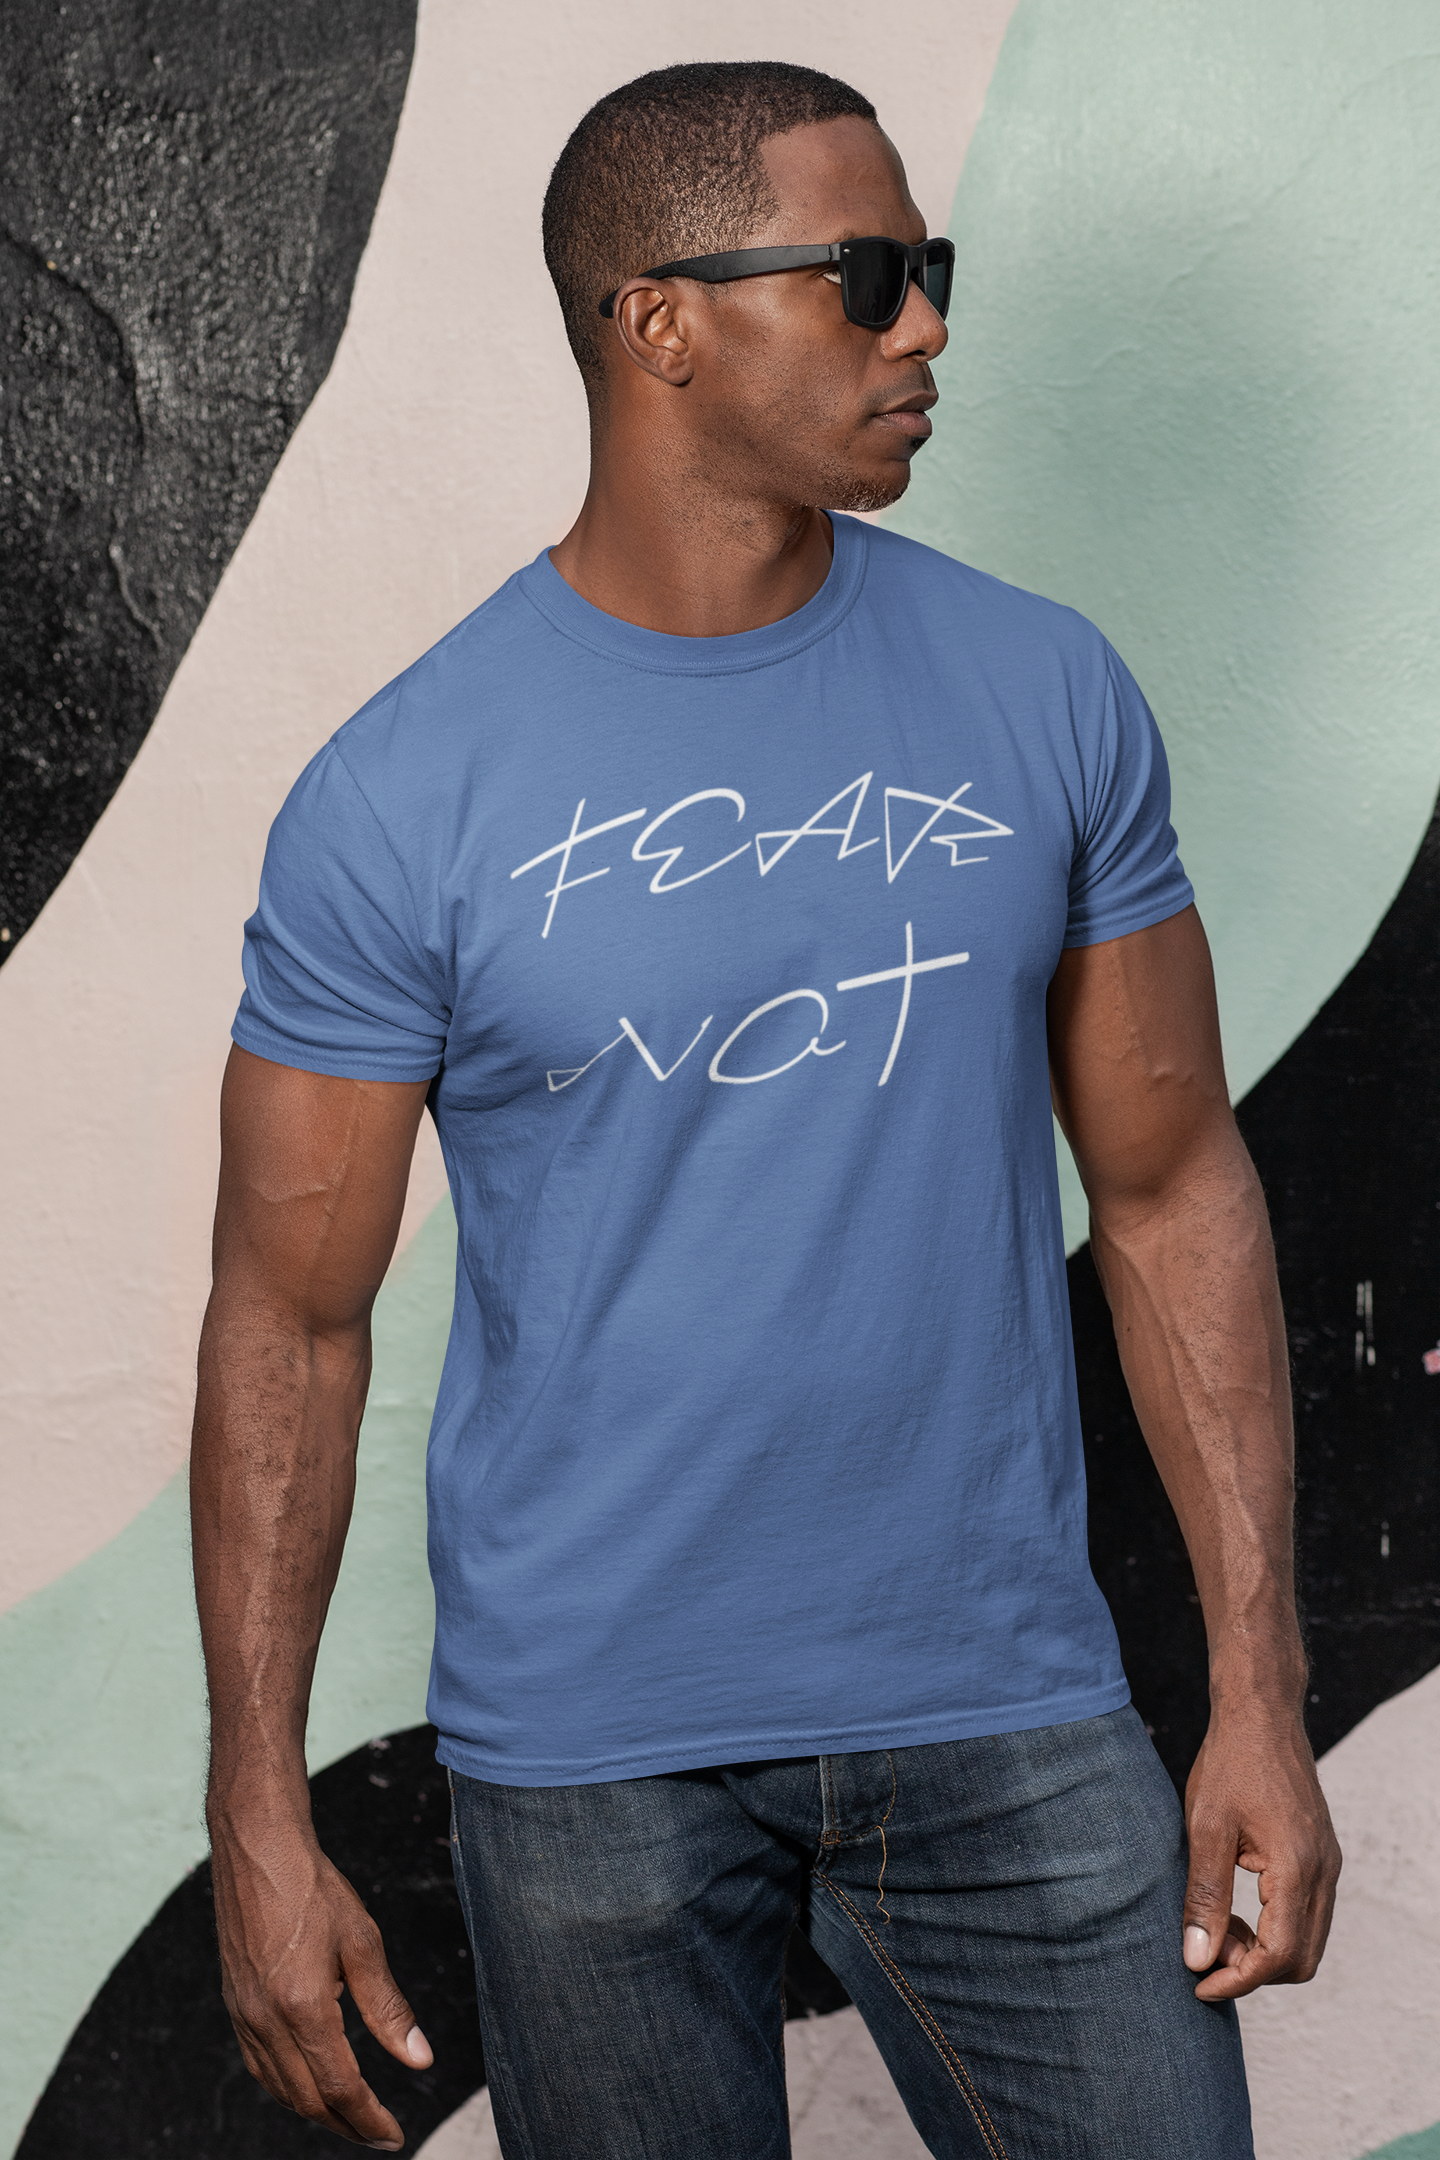 Bella & Canvas 3001 "Fear Not" in 7 Colors and 6 Sizes (4483667296350)